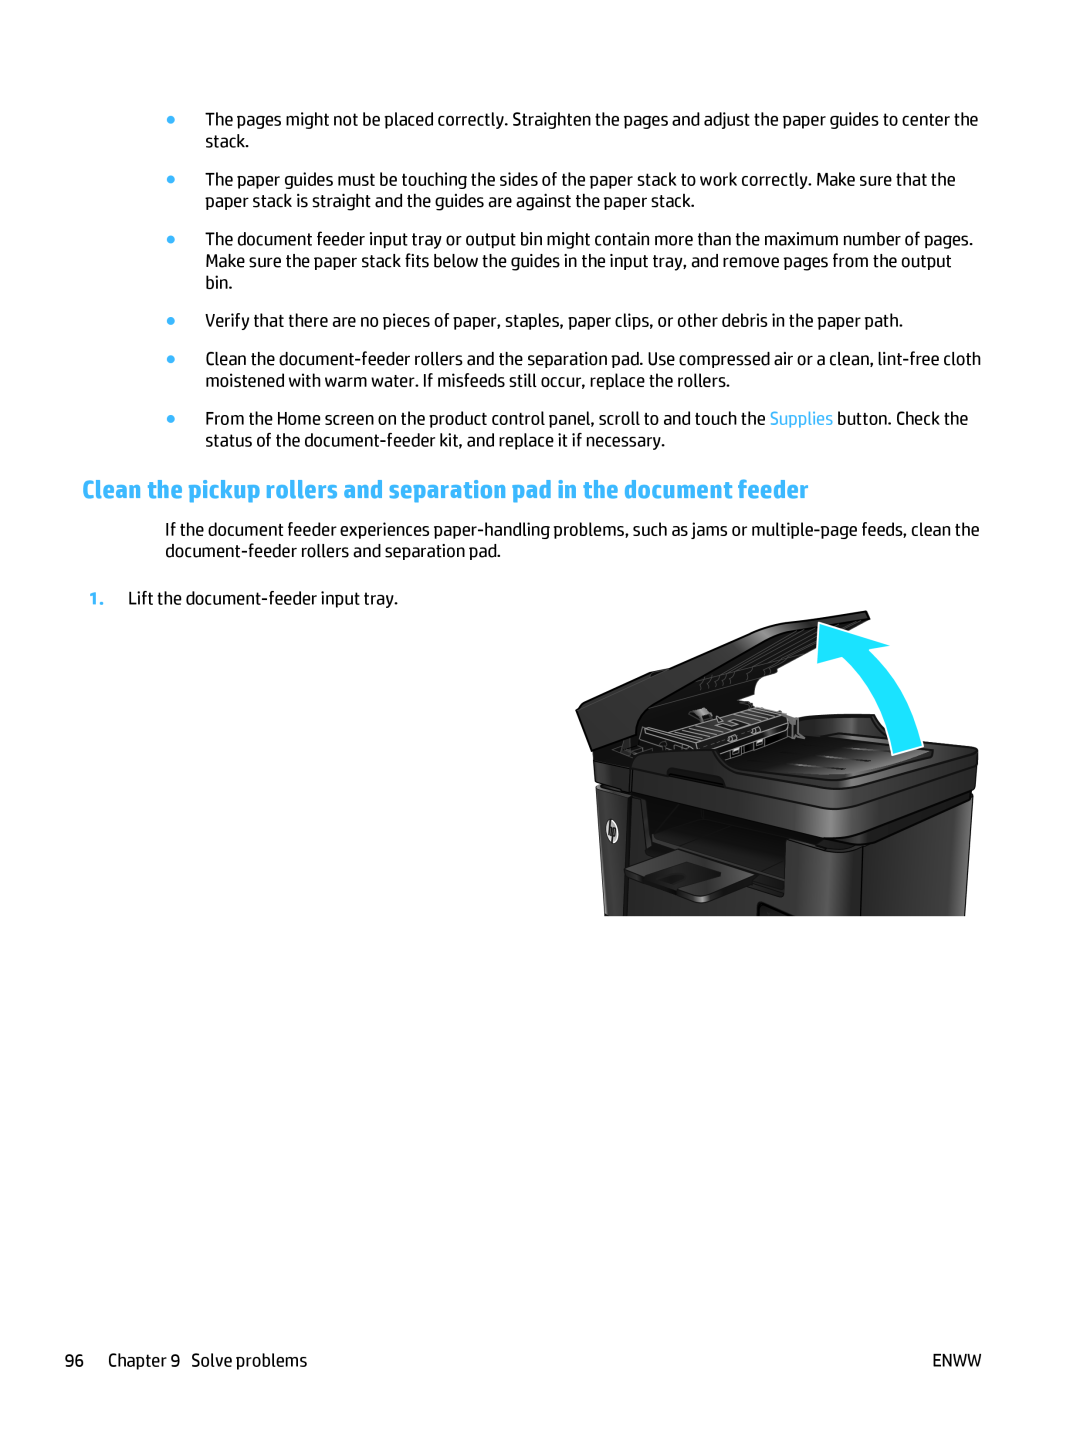 HP MFP M225dn, MFP M225dw manual Clean the pickup rollers and separation pad in the document feeder 